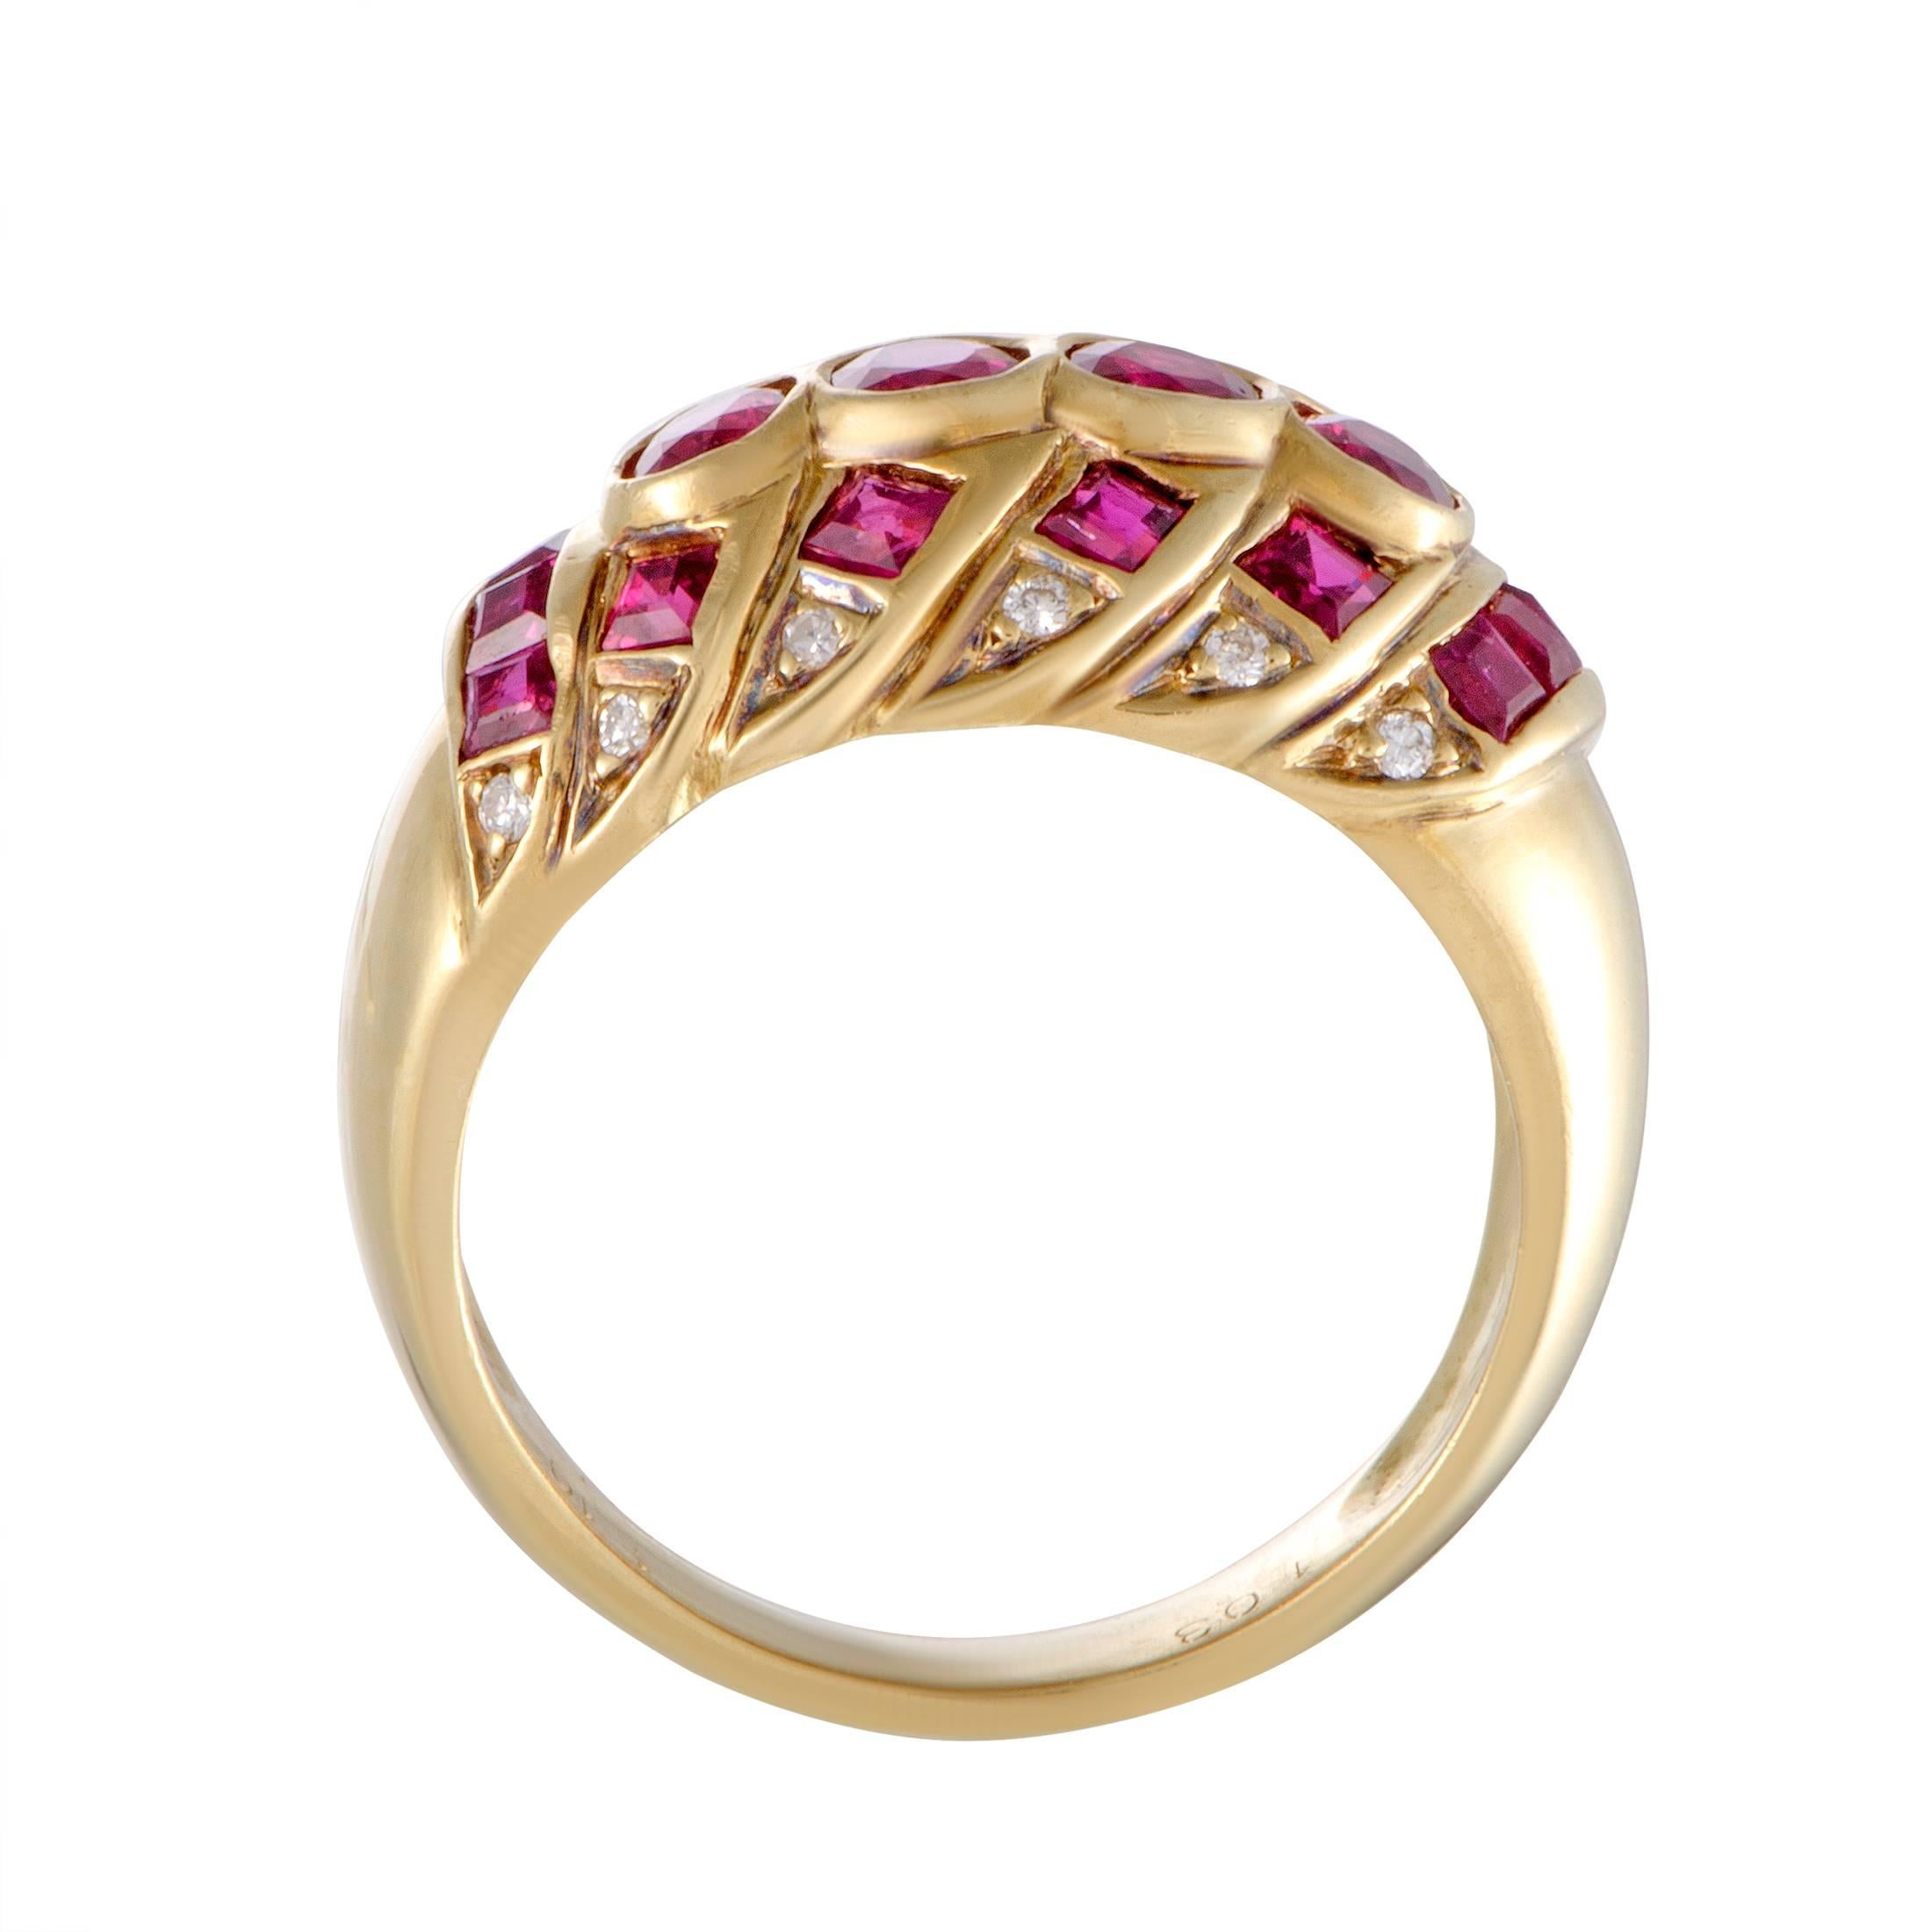 The radiant 18K yellow gold and the eye-catching diversely cut rubies produce an incredibly fashionable effect in this gorgeous ring. The rubies total 2.22 carats and are accompanied by 0.08 carats of diamonds.
Ring Top Dimensions: 20mm x 11mm
Band